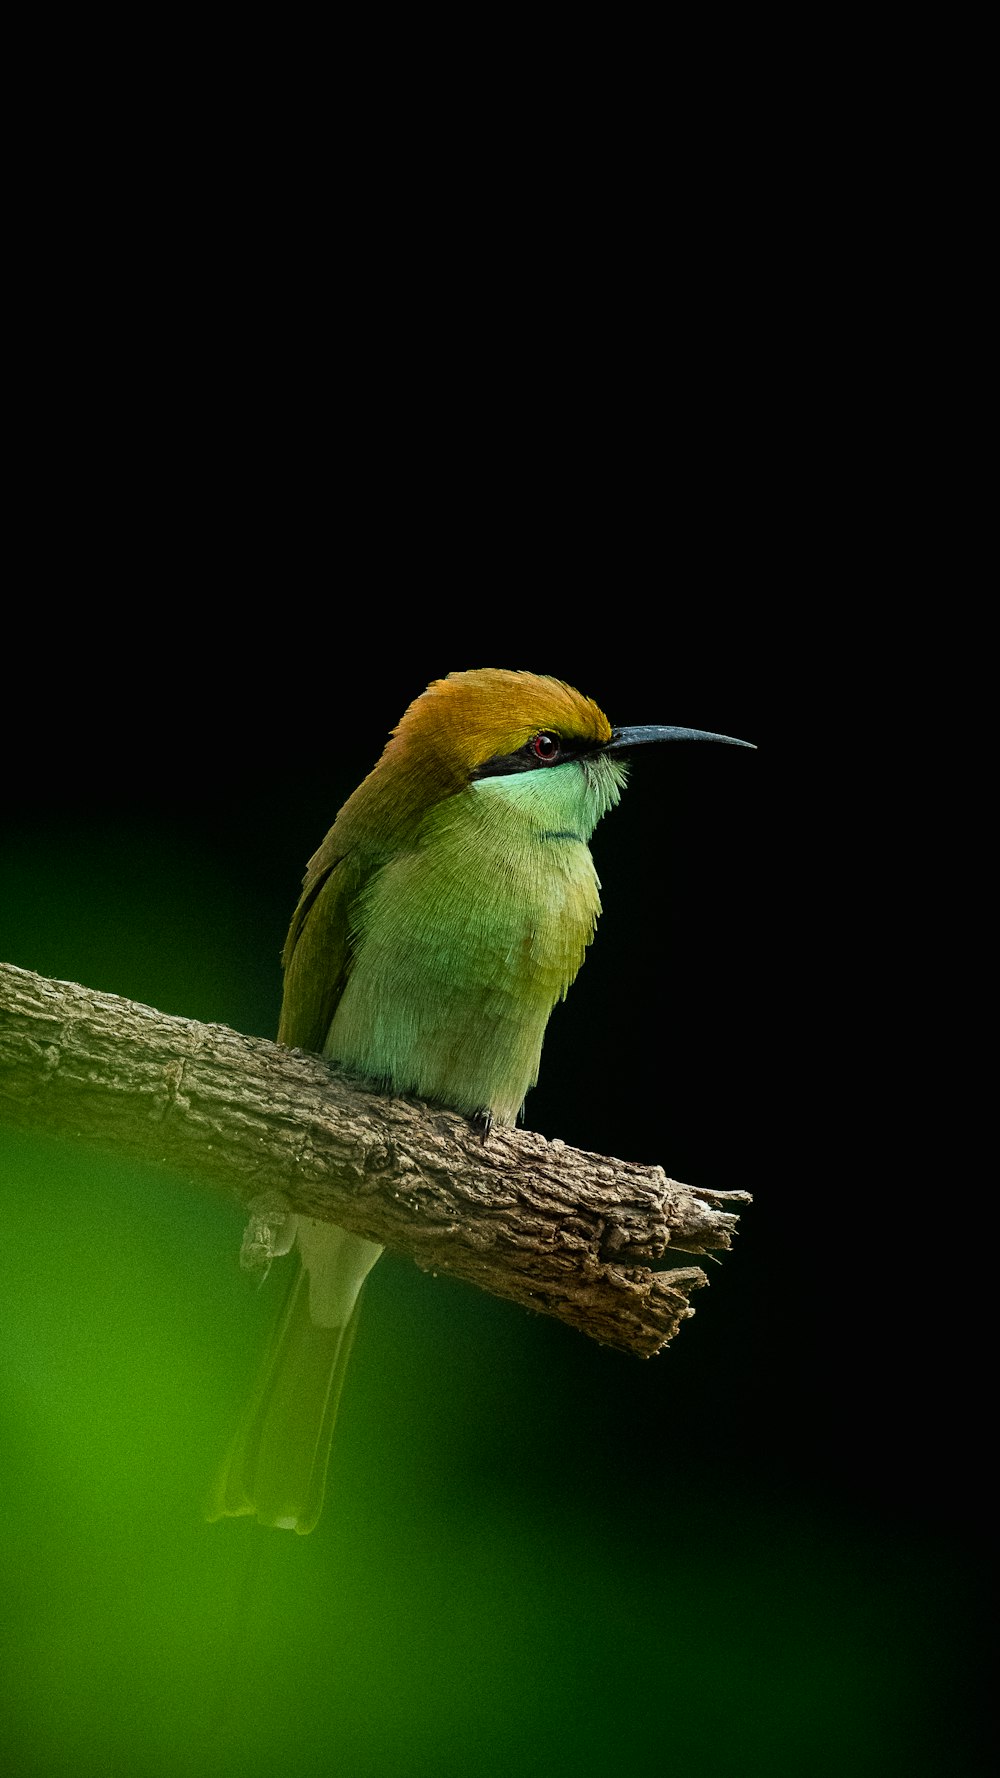 a bird with a long beak sitting on a branch